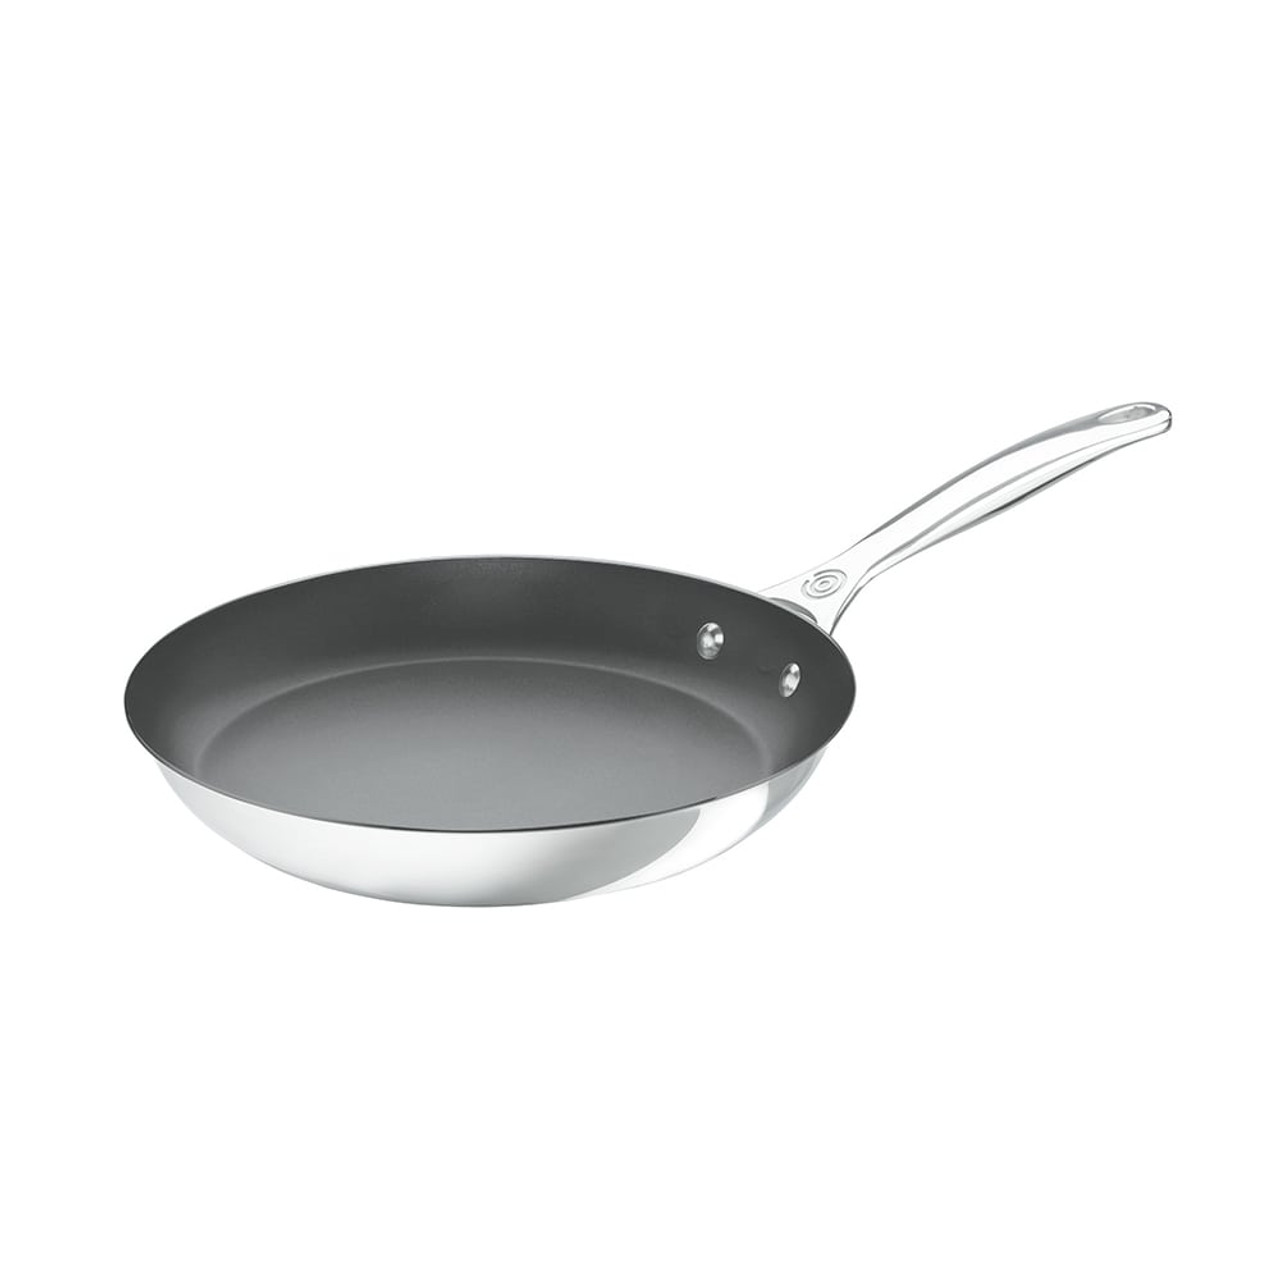 https://cdn11.bigcommerce.com/s-hccytny0od/images/stencil/1280x1280/products/3925/14287/le-creuset-stainless-steel-nonstick-fry-pan-8in__92299.1612875196.jpg?c=2?imbypass=on